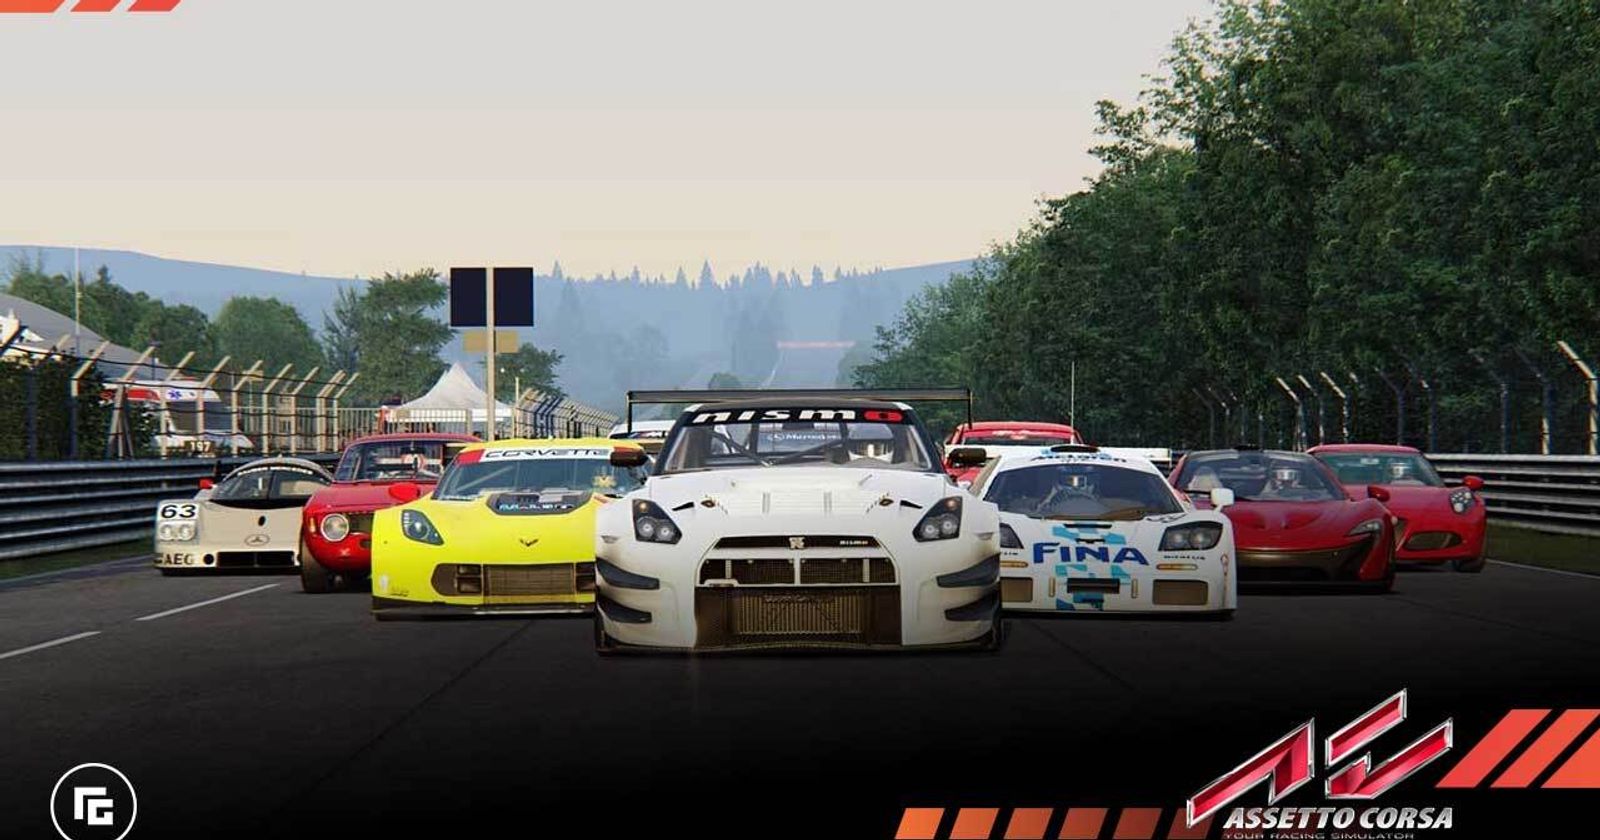 PT] Assetto Corsa, Ready To Race Pack - Review